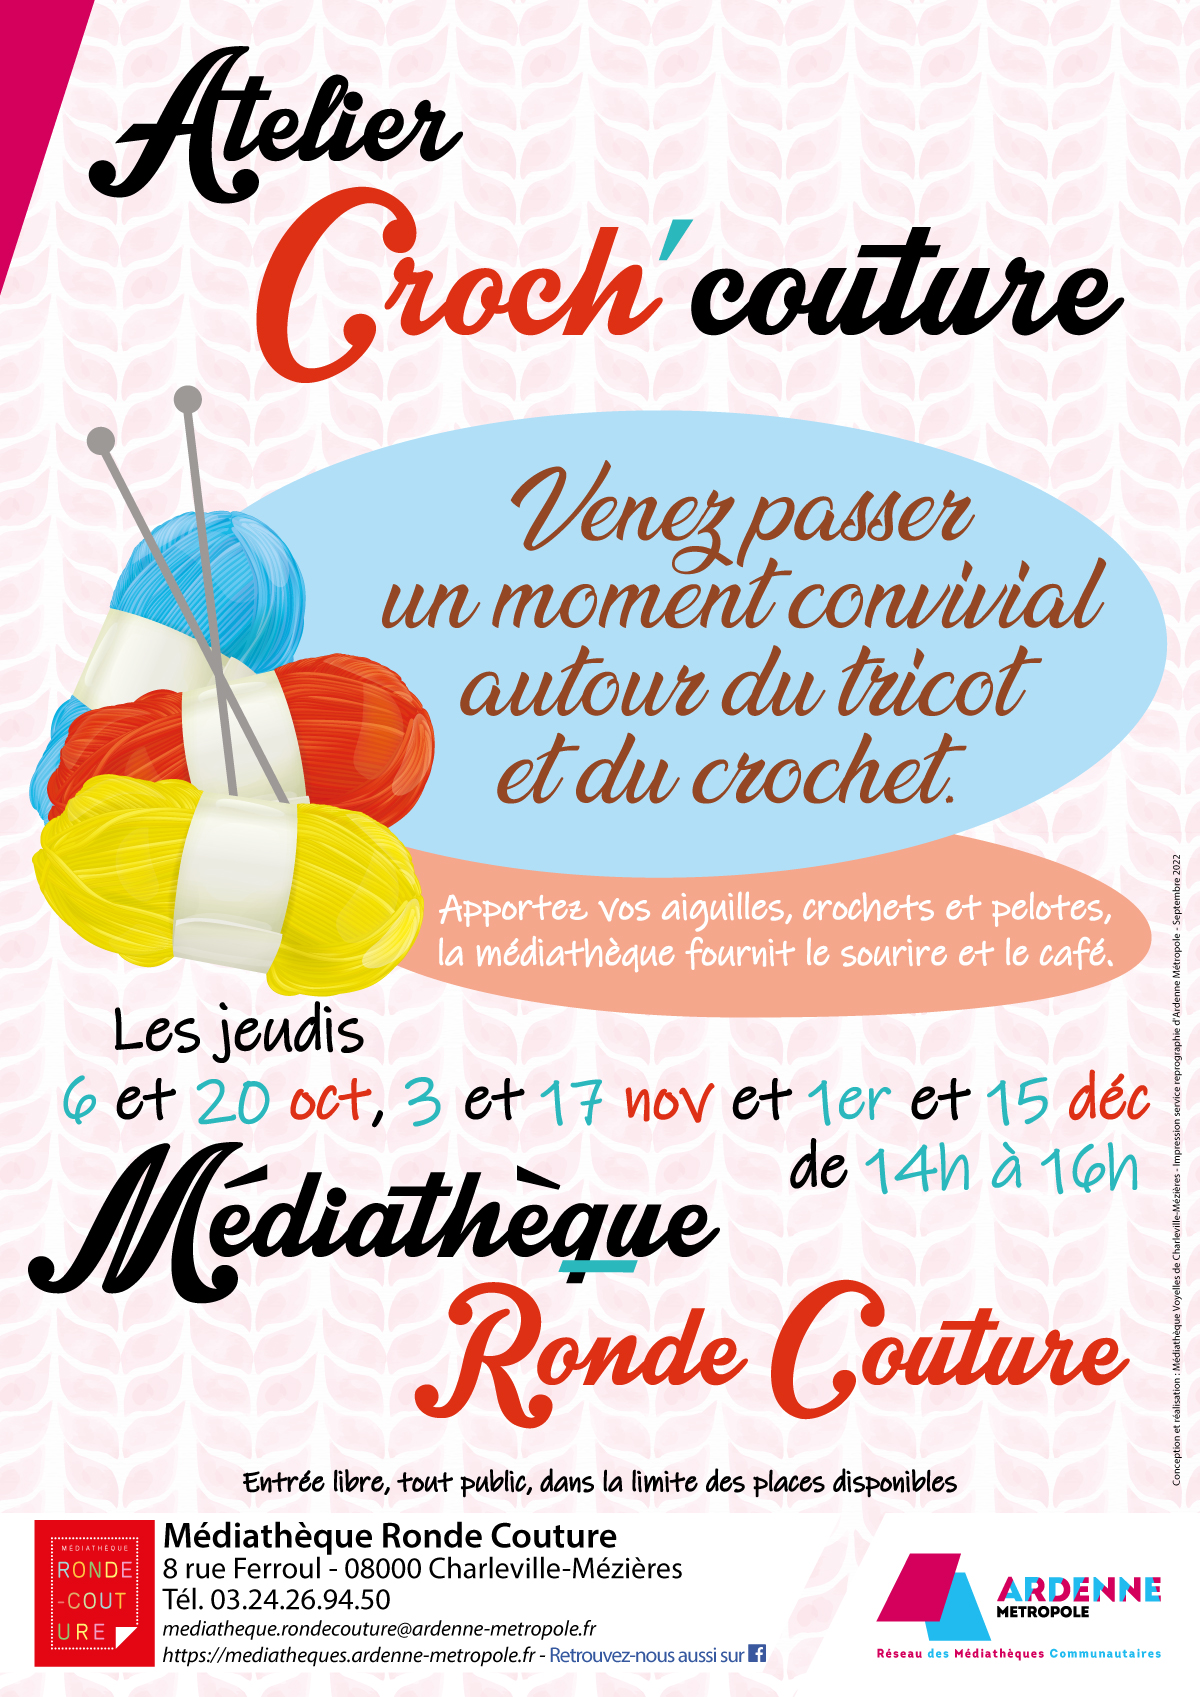 Atelier Croch Couture 2021